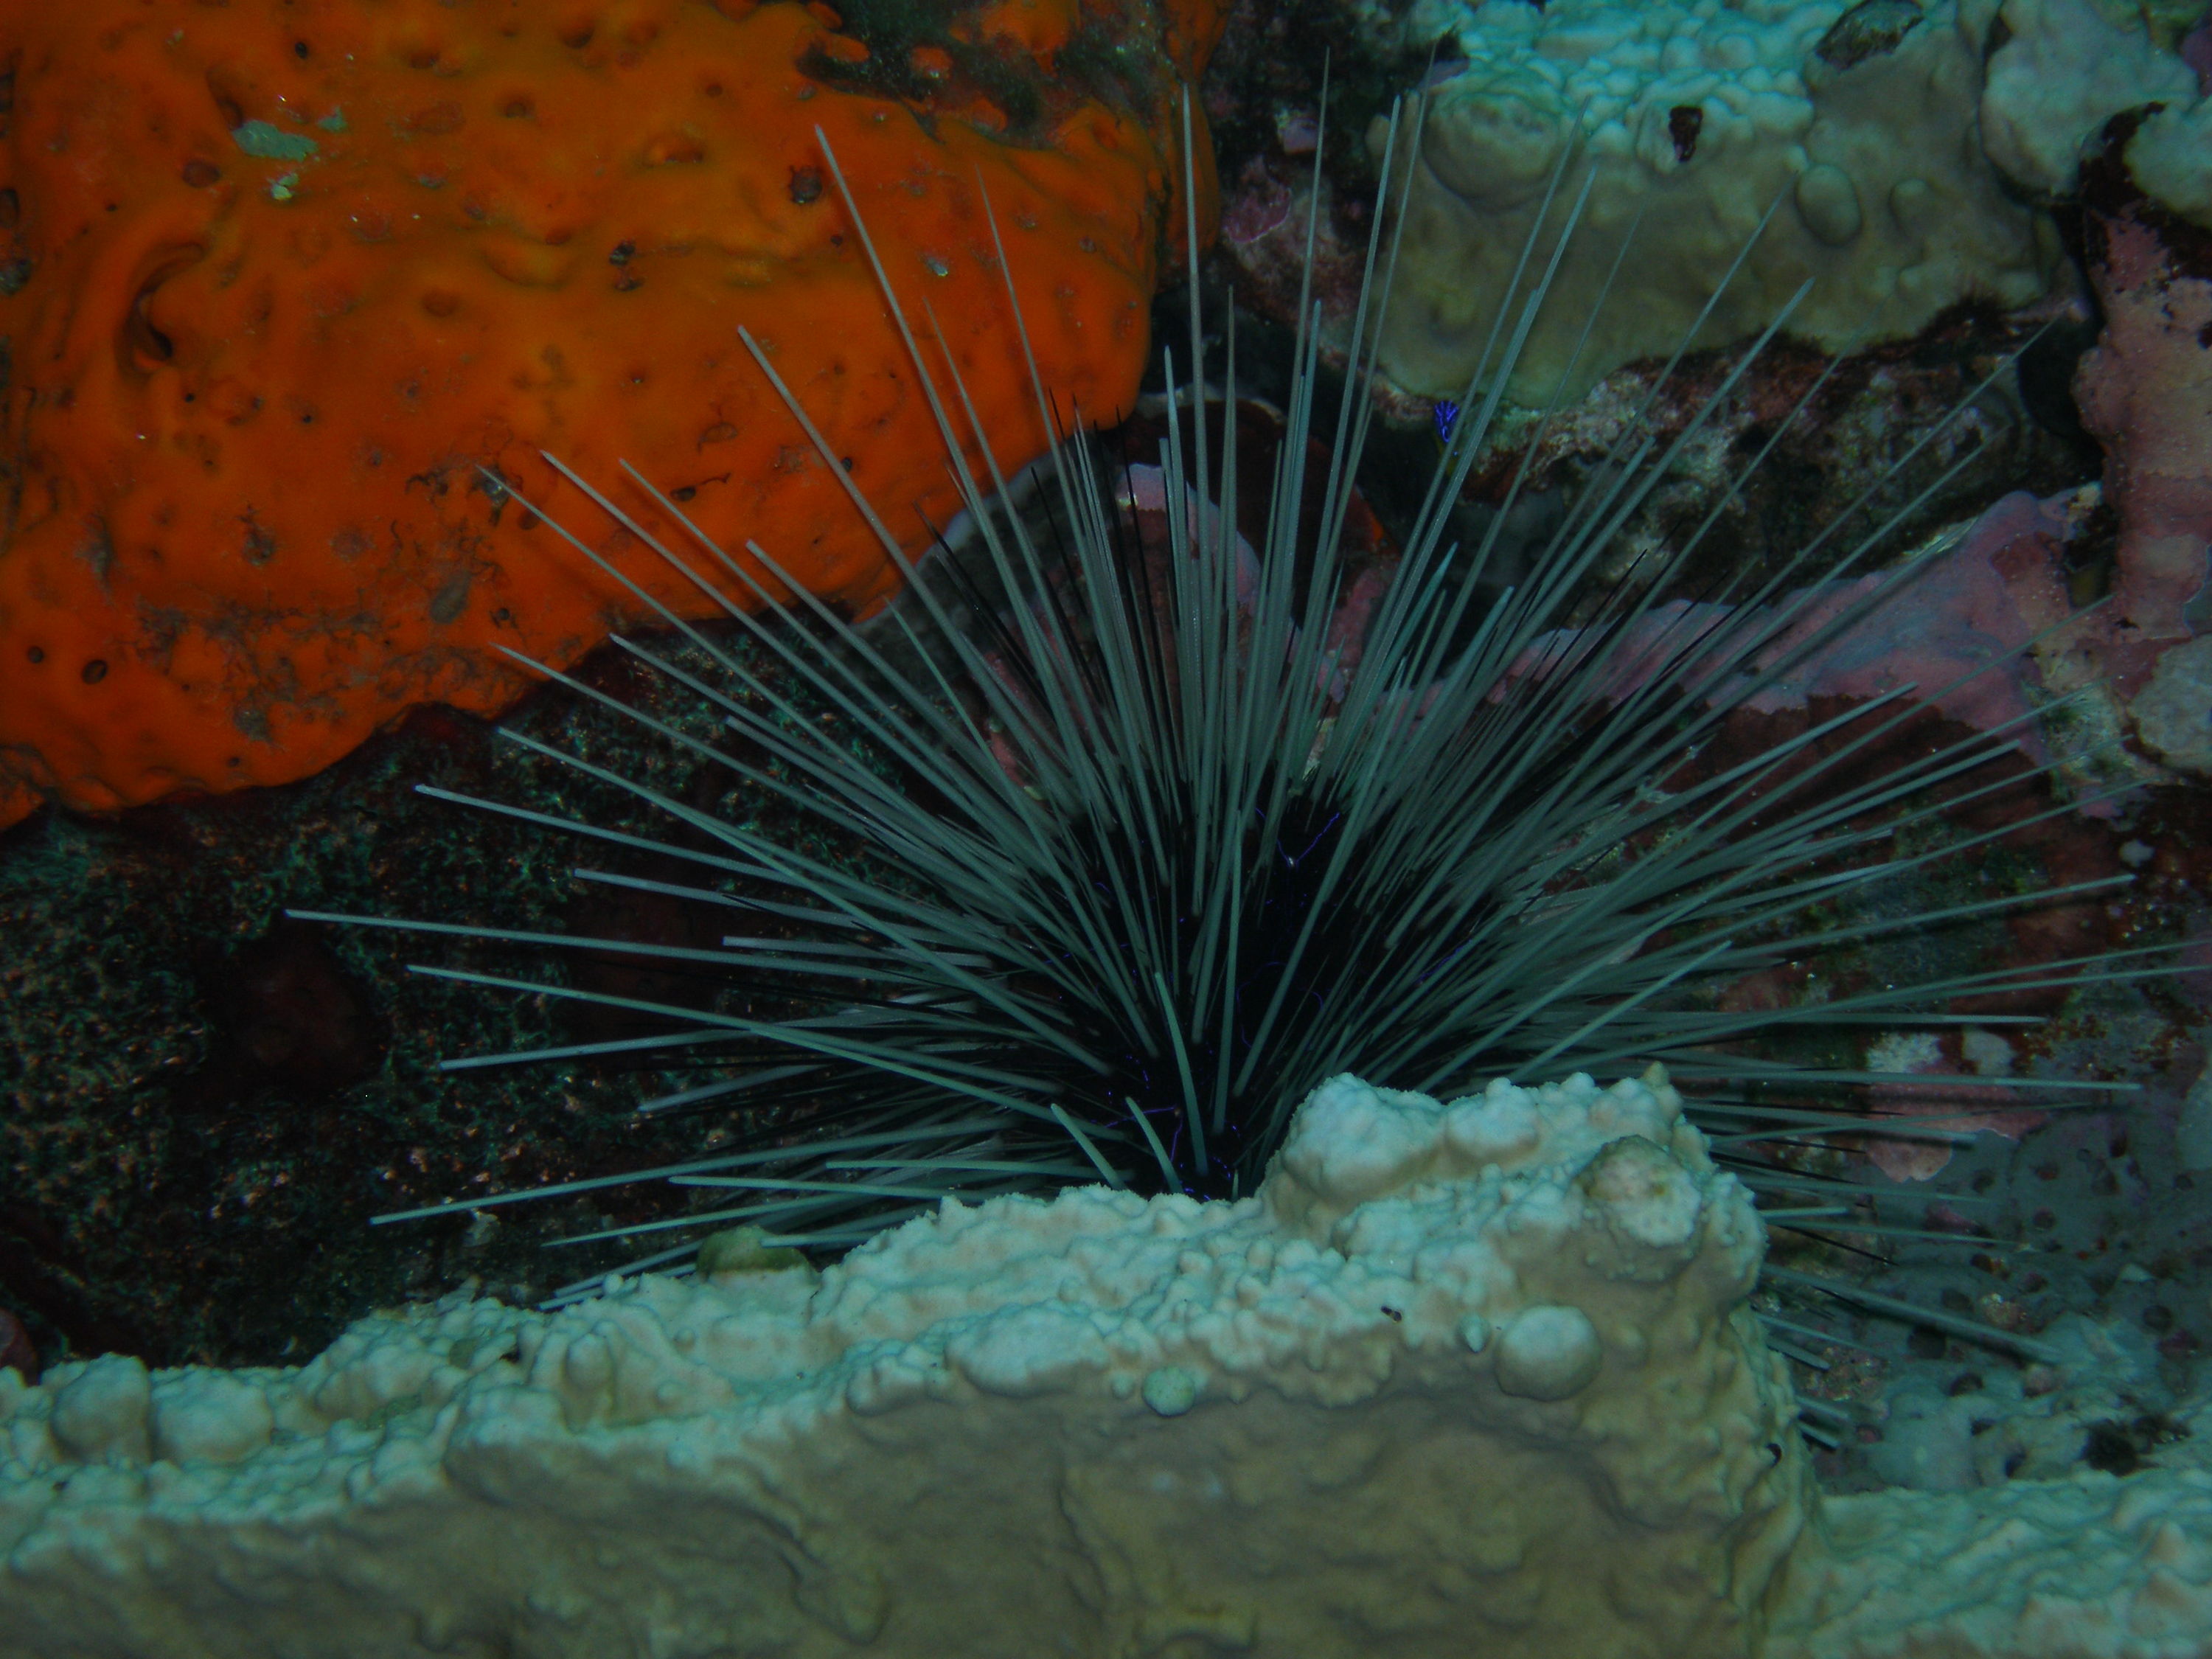 Long spined urchin